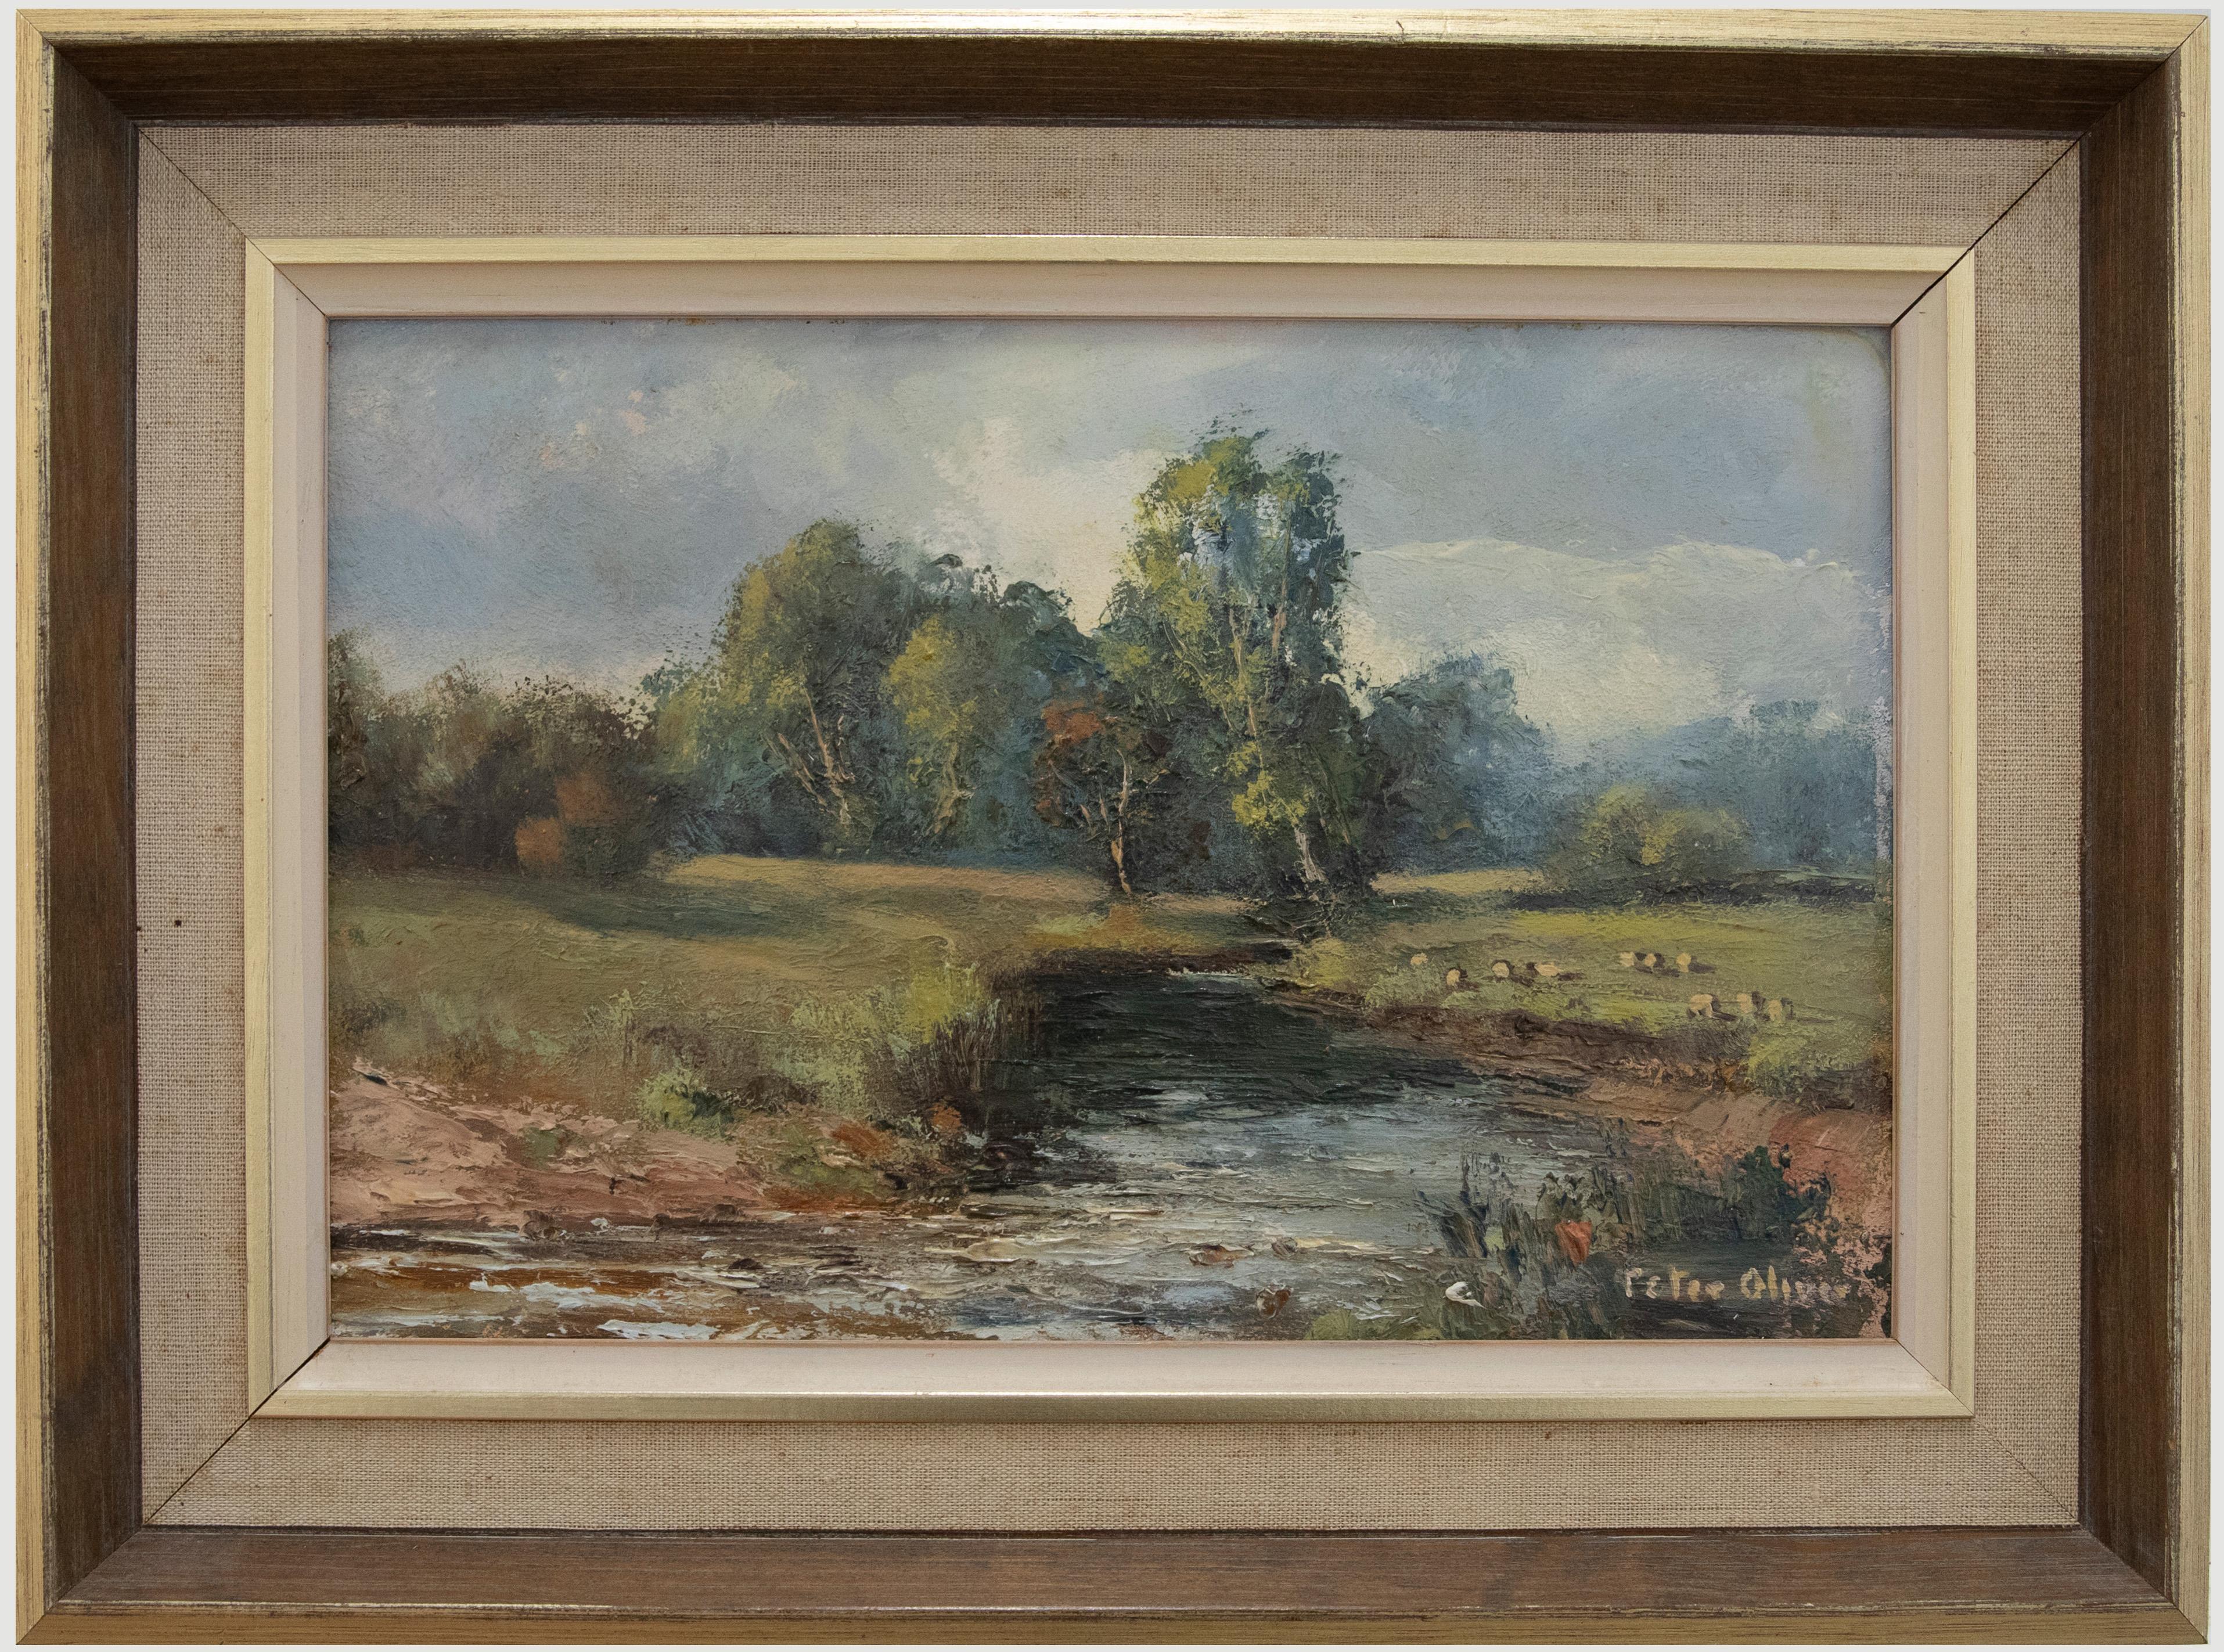 A charming landscape view of the river otter flowing through a Devon landscape. Sheep graze in nearby fields and the summer sun reflects from the water. Signed to the lower right. Presented in wooden frame with a cotton slip. On board.